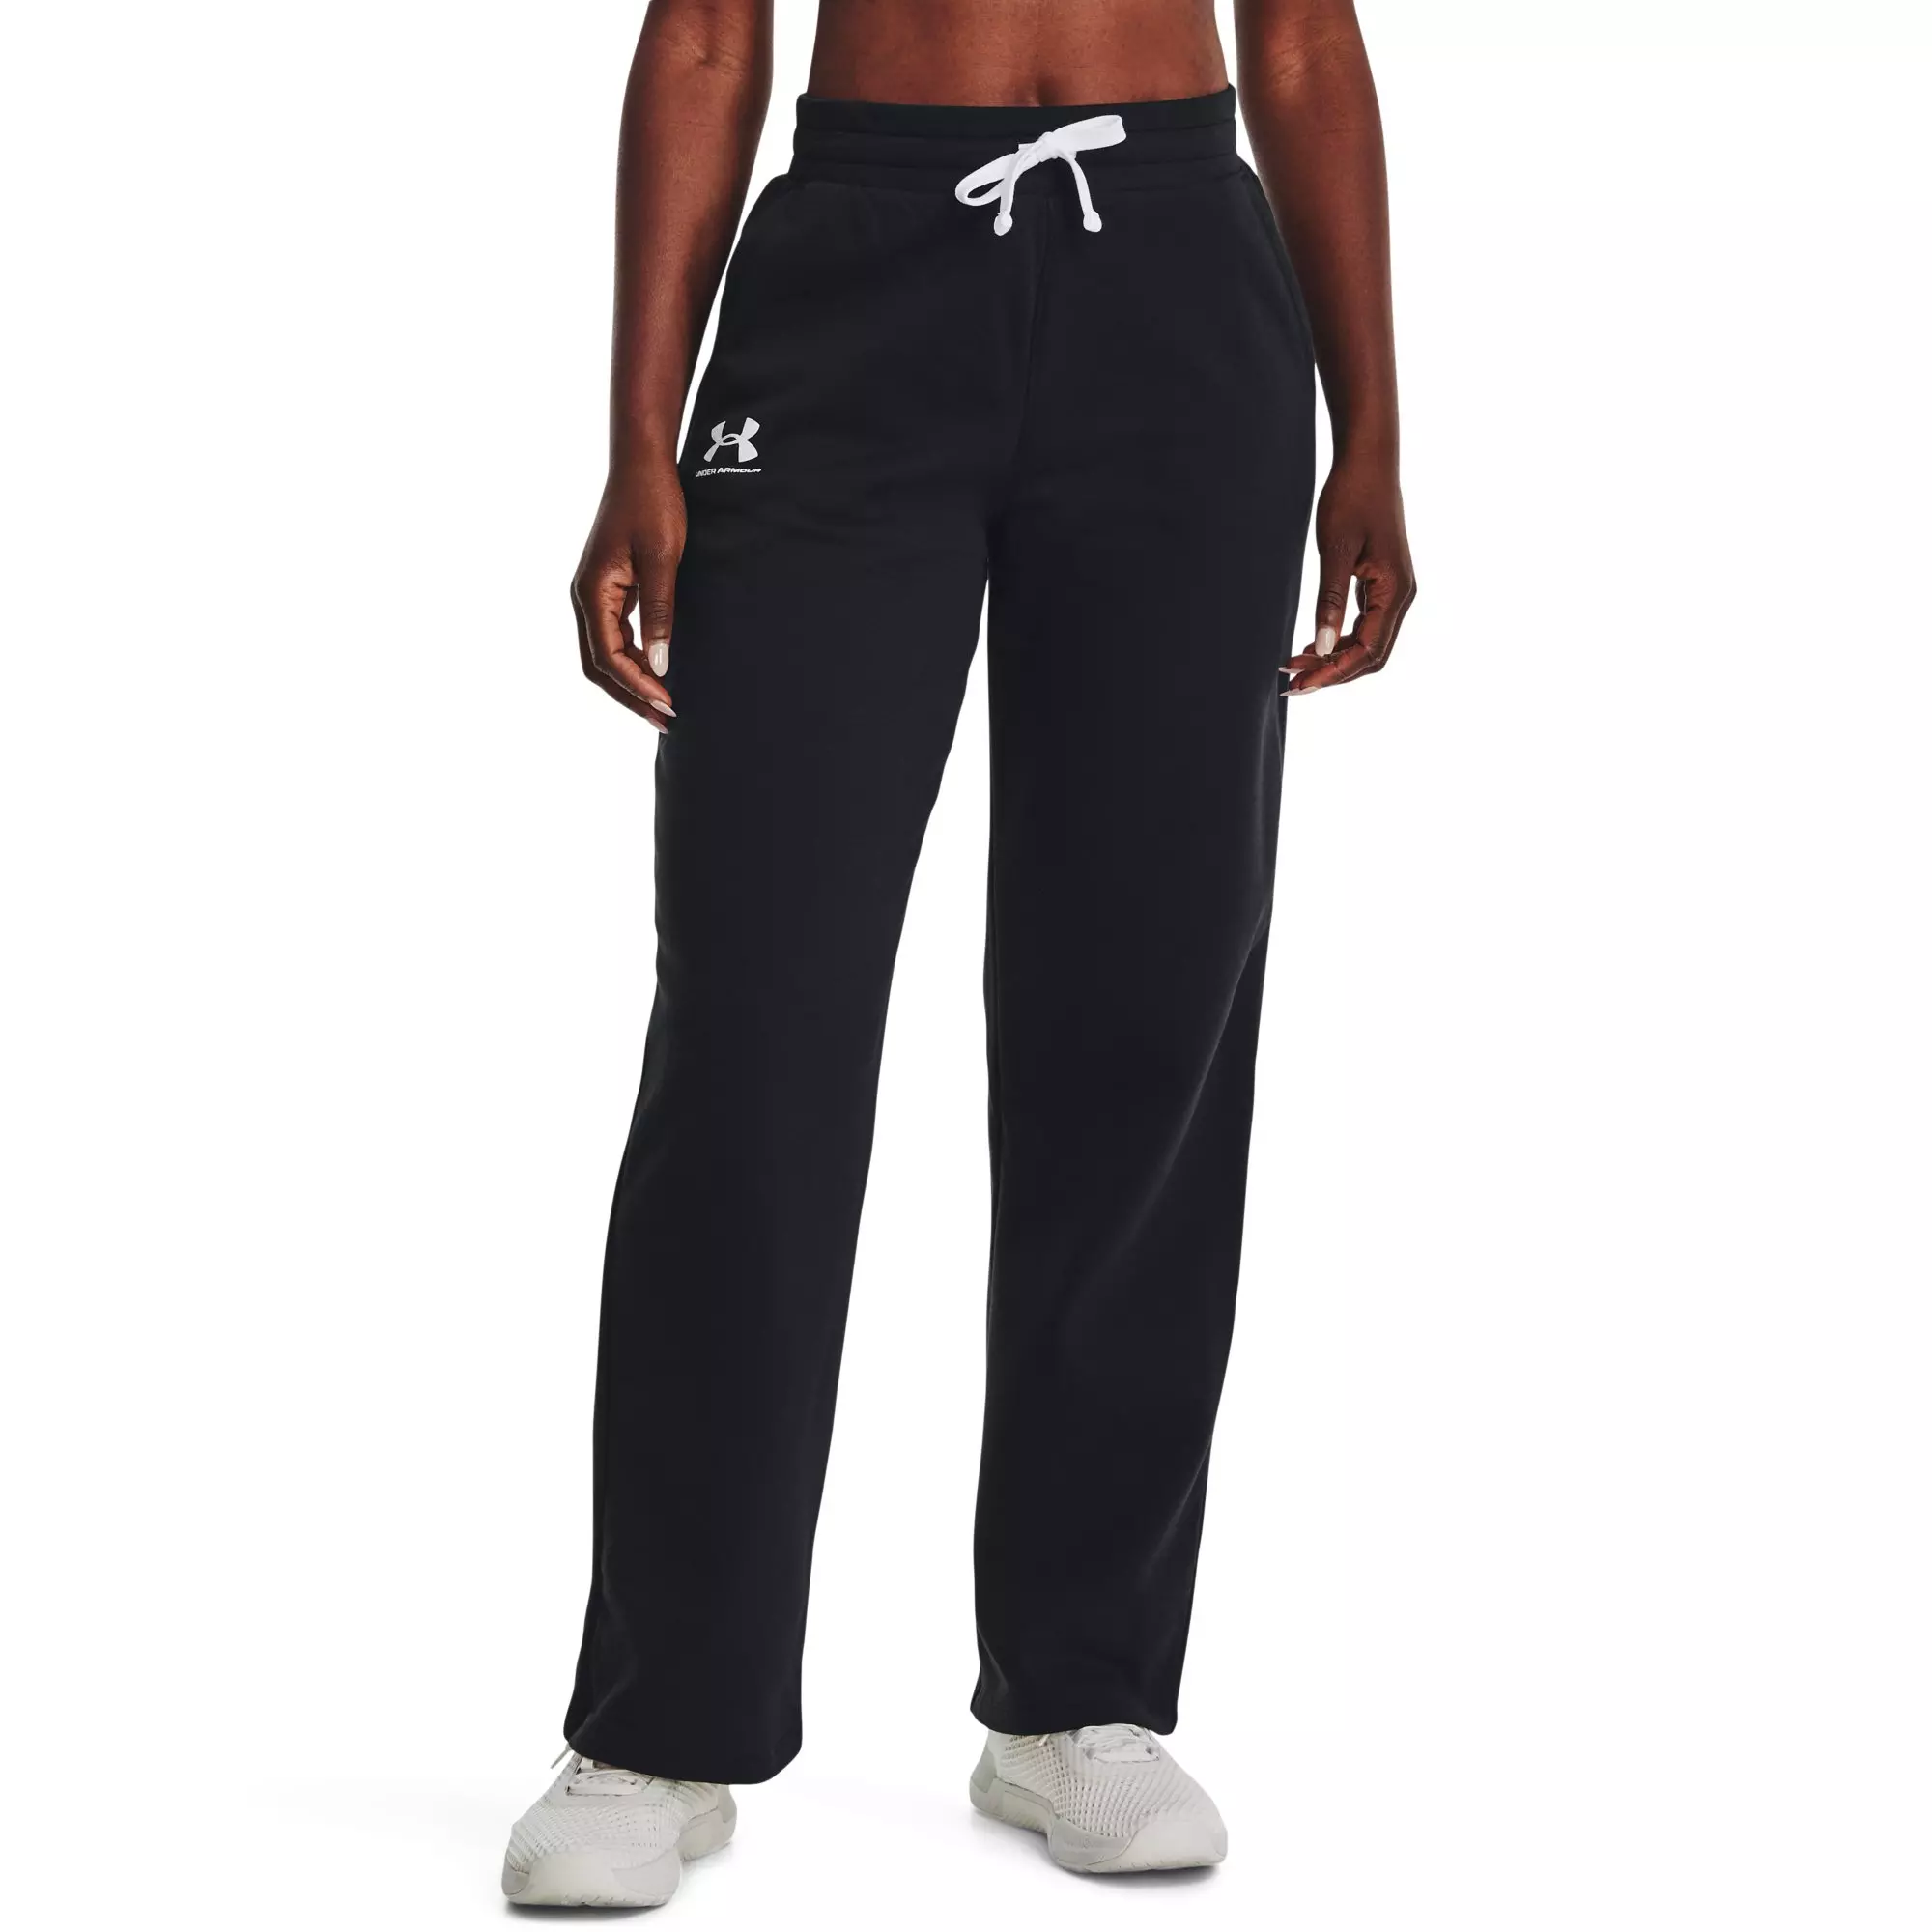 Long Sports Trousers Under Armour Rival Fleece Lady - best prices